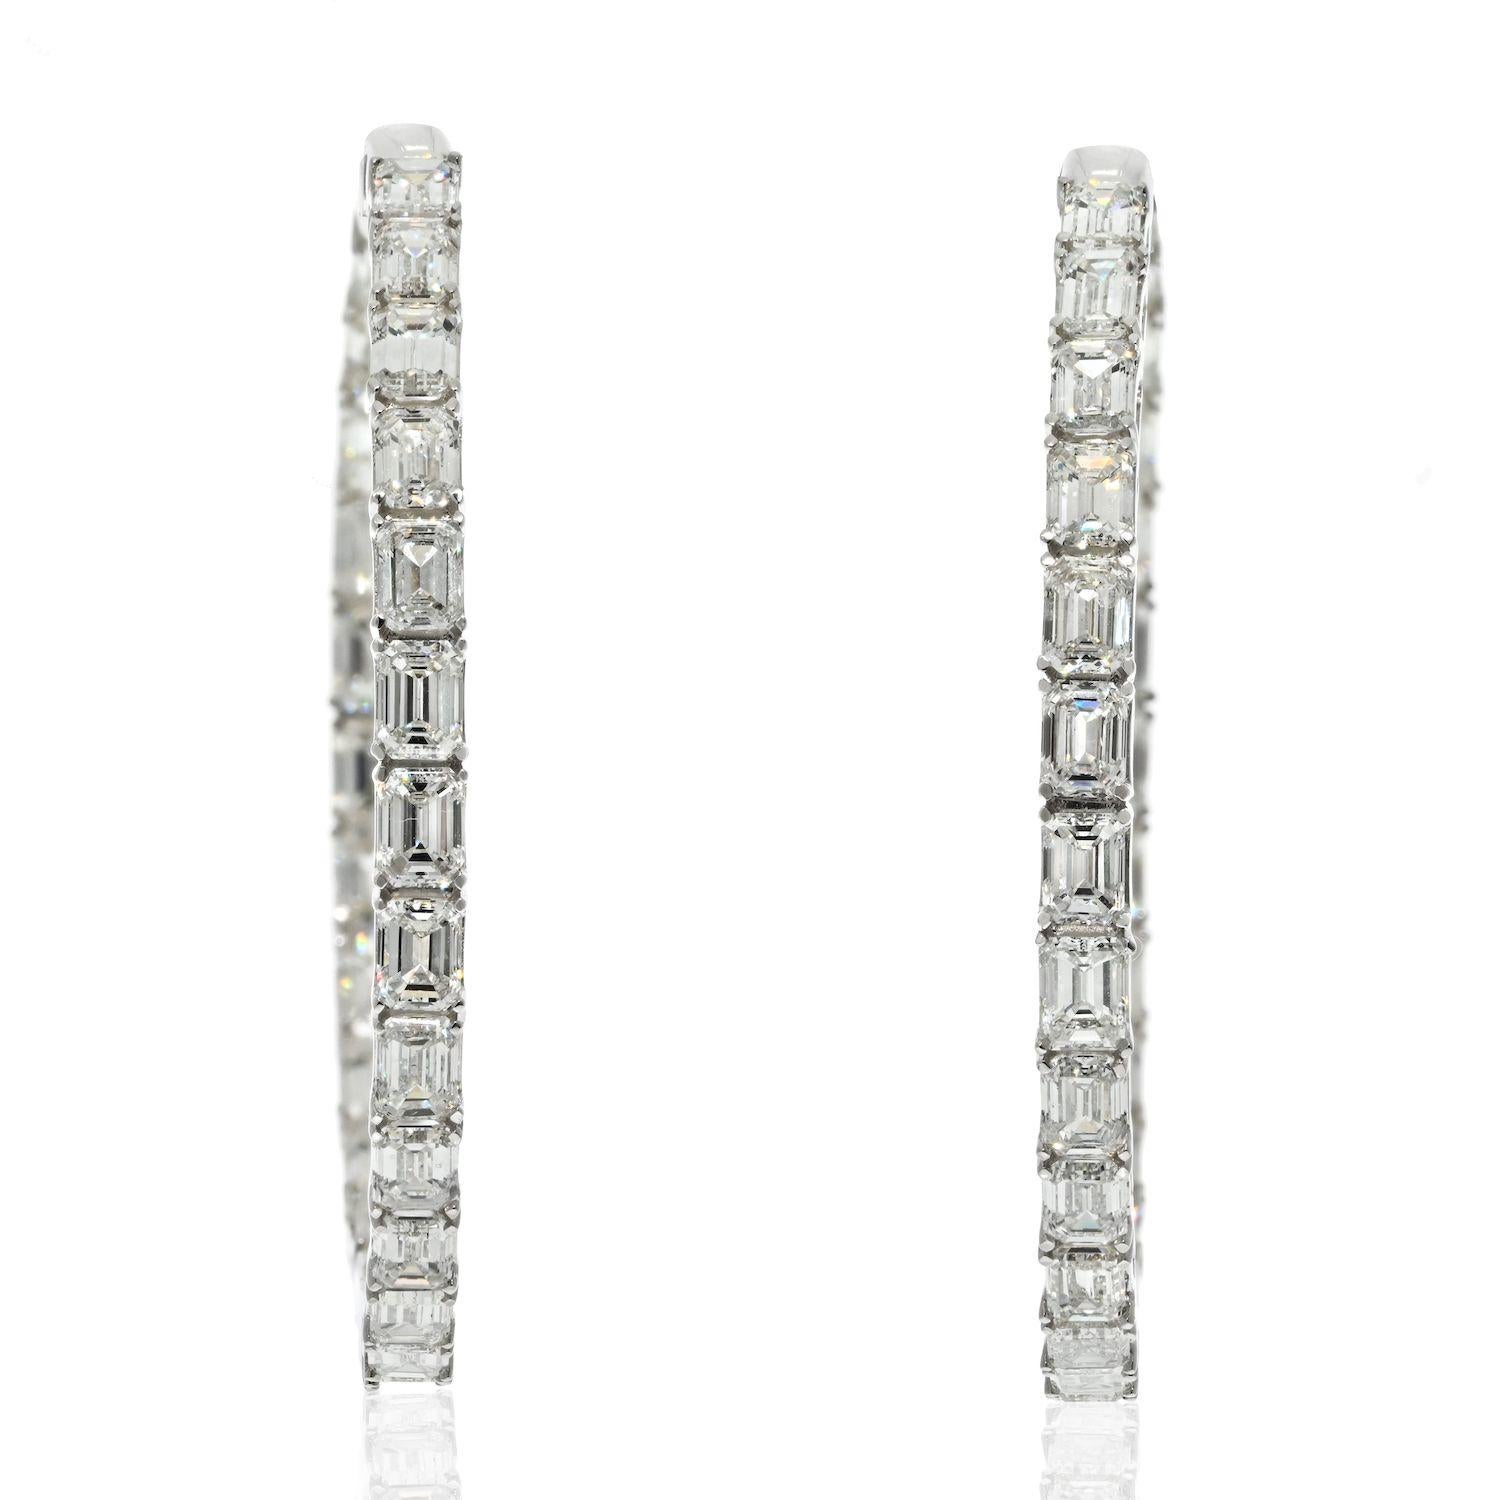 You will love the look of these 1.5 inches hoop earrings the moment you open the box. These are made with diamonds mounted inside and out, and best of all these are emerald cut diamonds that are oh so special. 
Perfect to wear for all your special